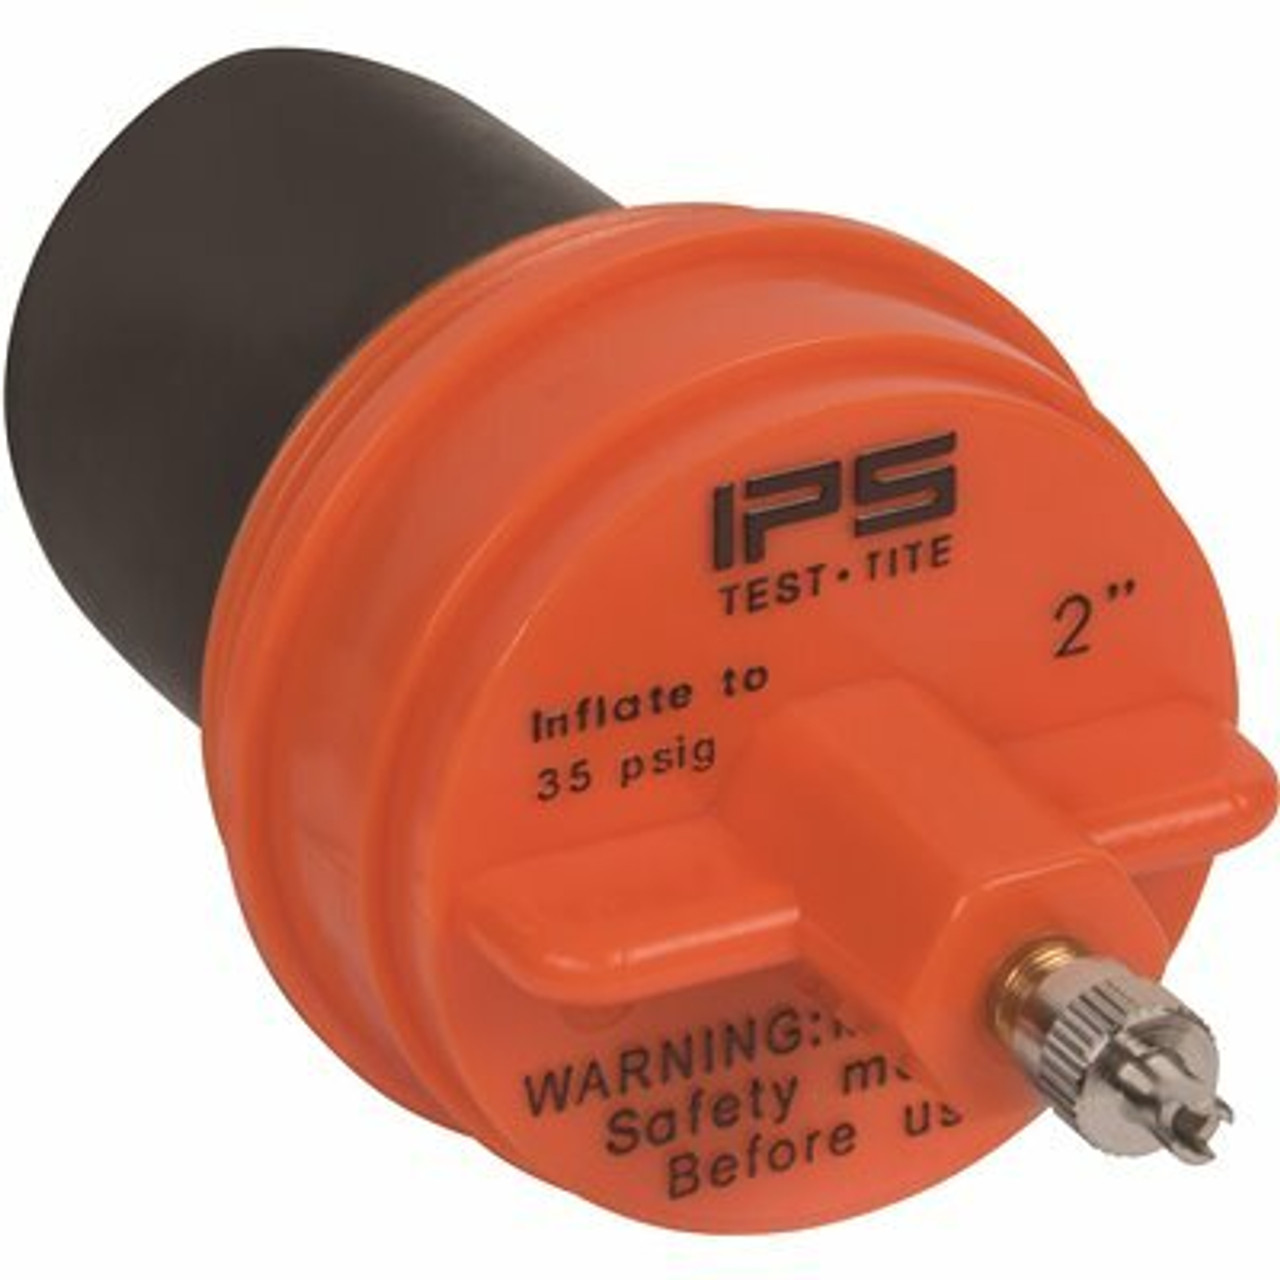 Ips Corporation 2 In. Ips Cleanout Test Plug For General Use